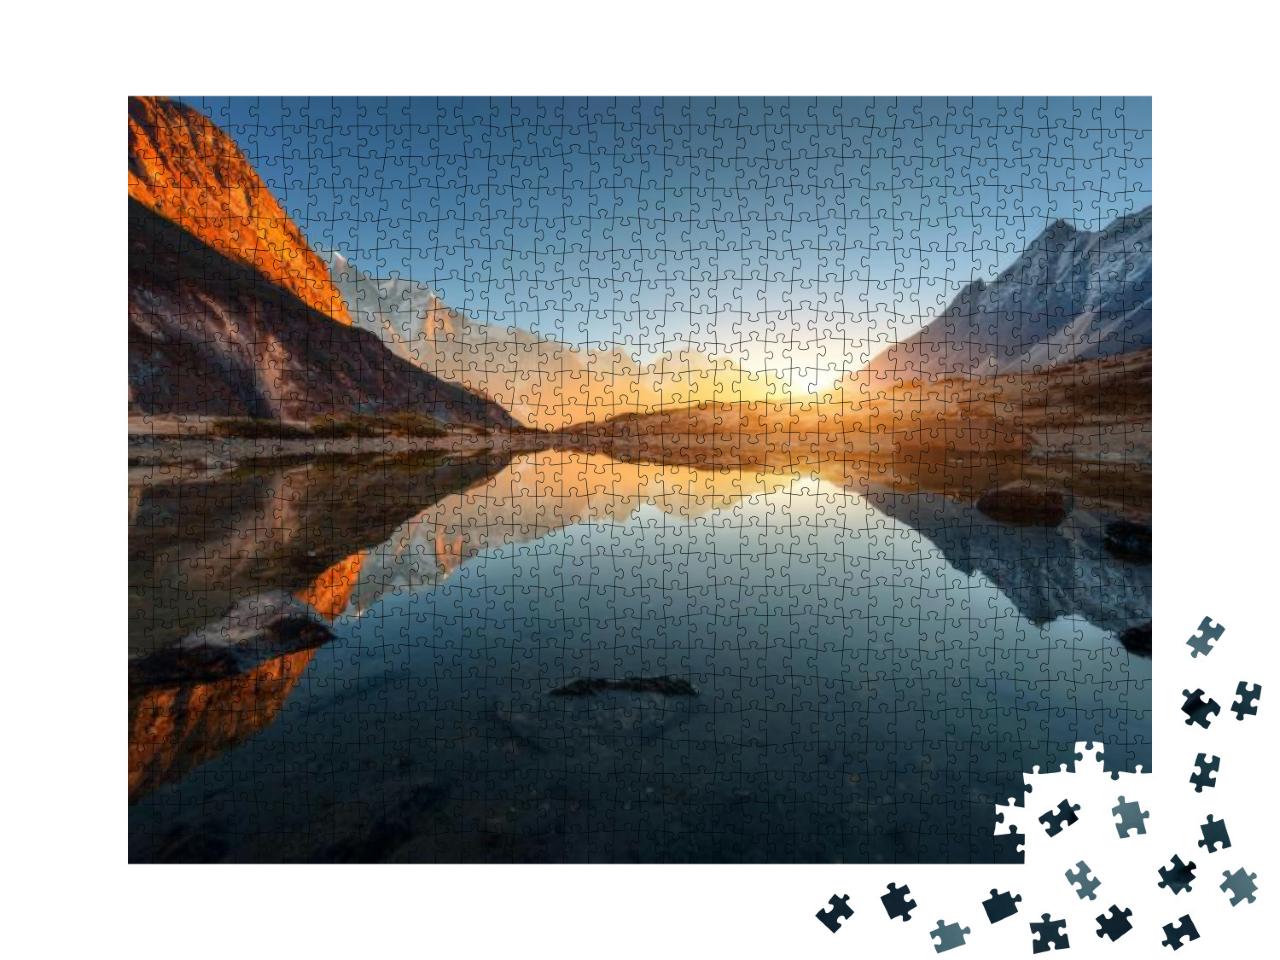 Beautiful Landscape with High Rocks with Illuminated Peak... Jigsaw Puzzle with 1000 pieces